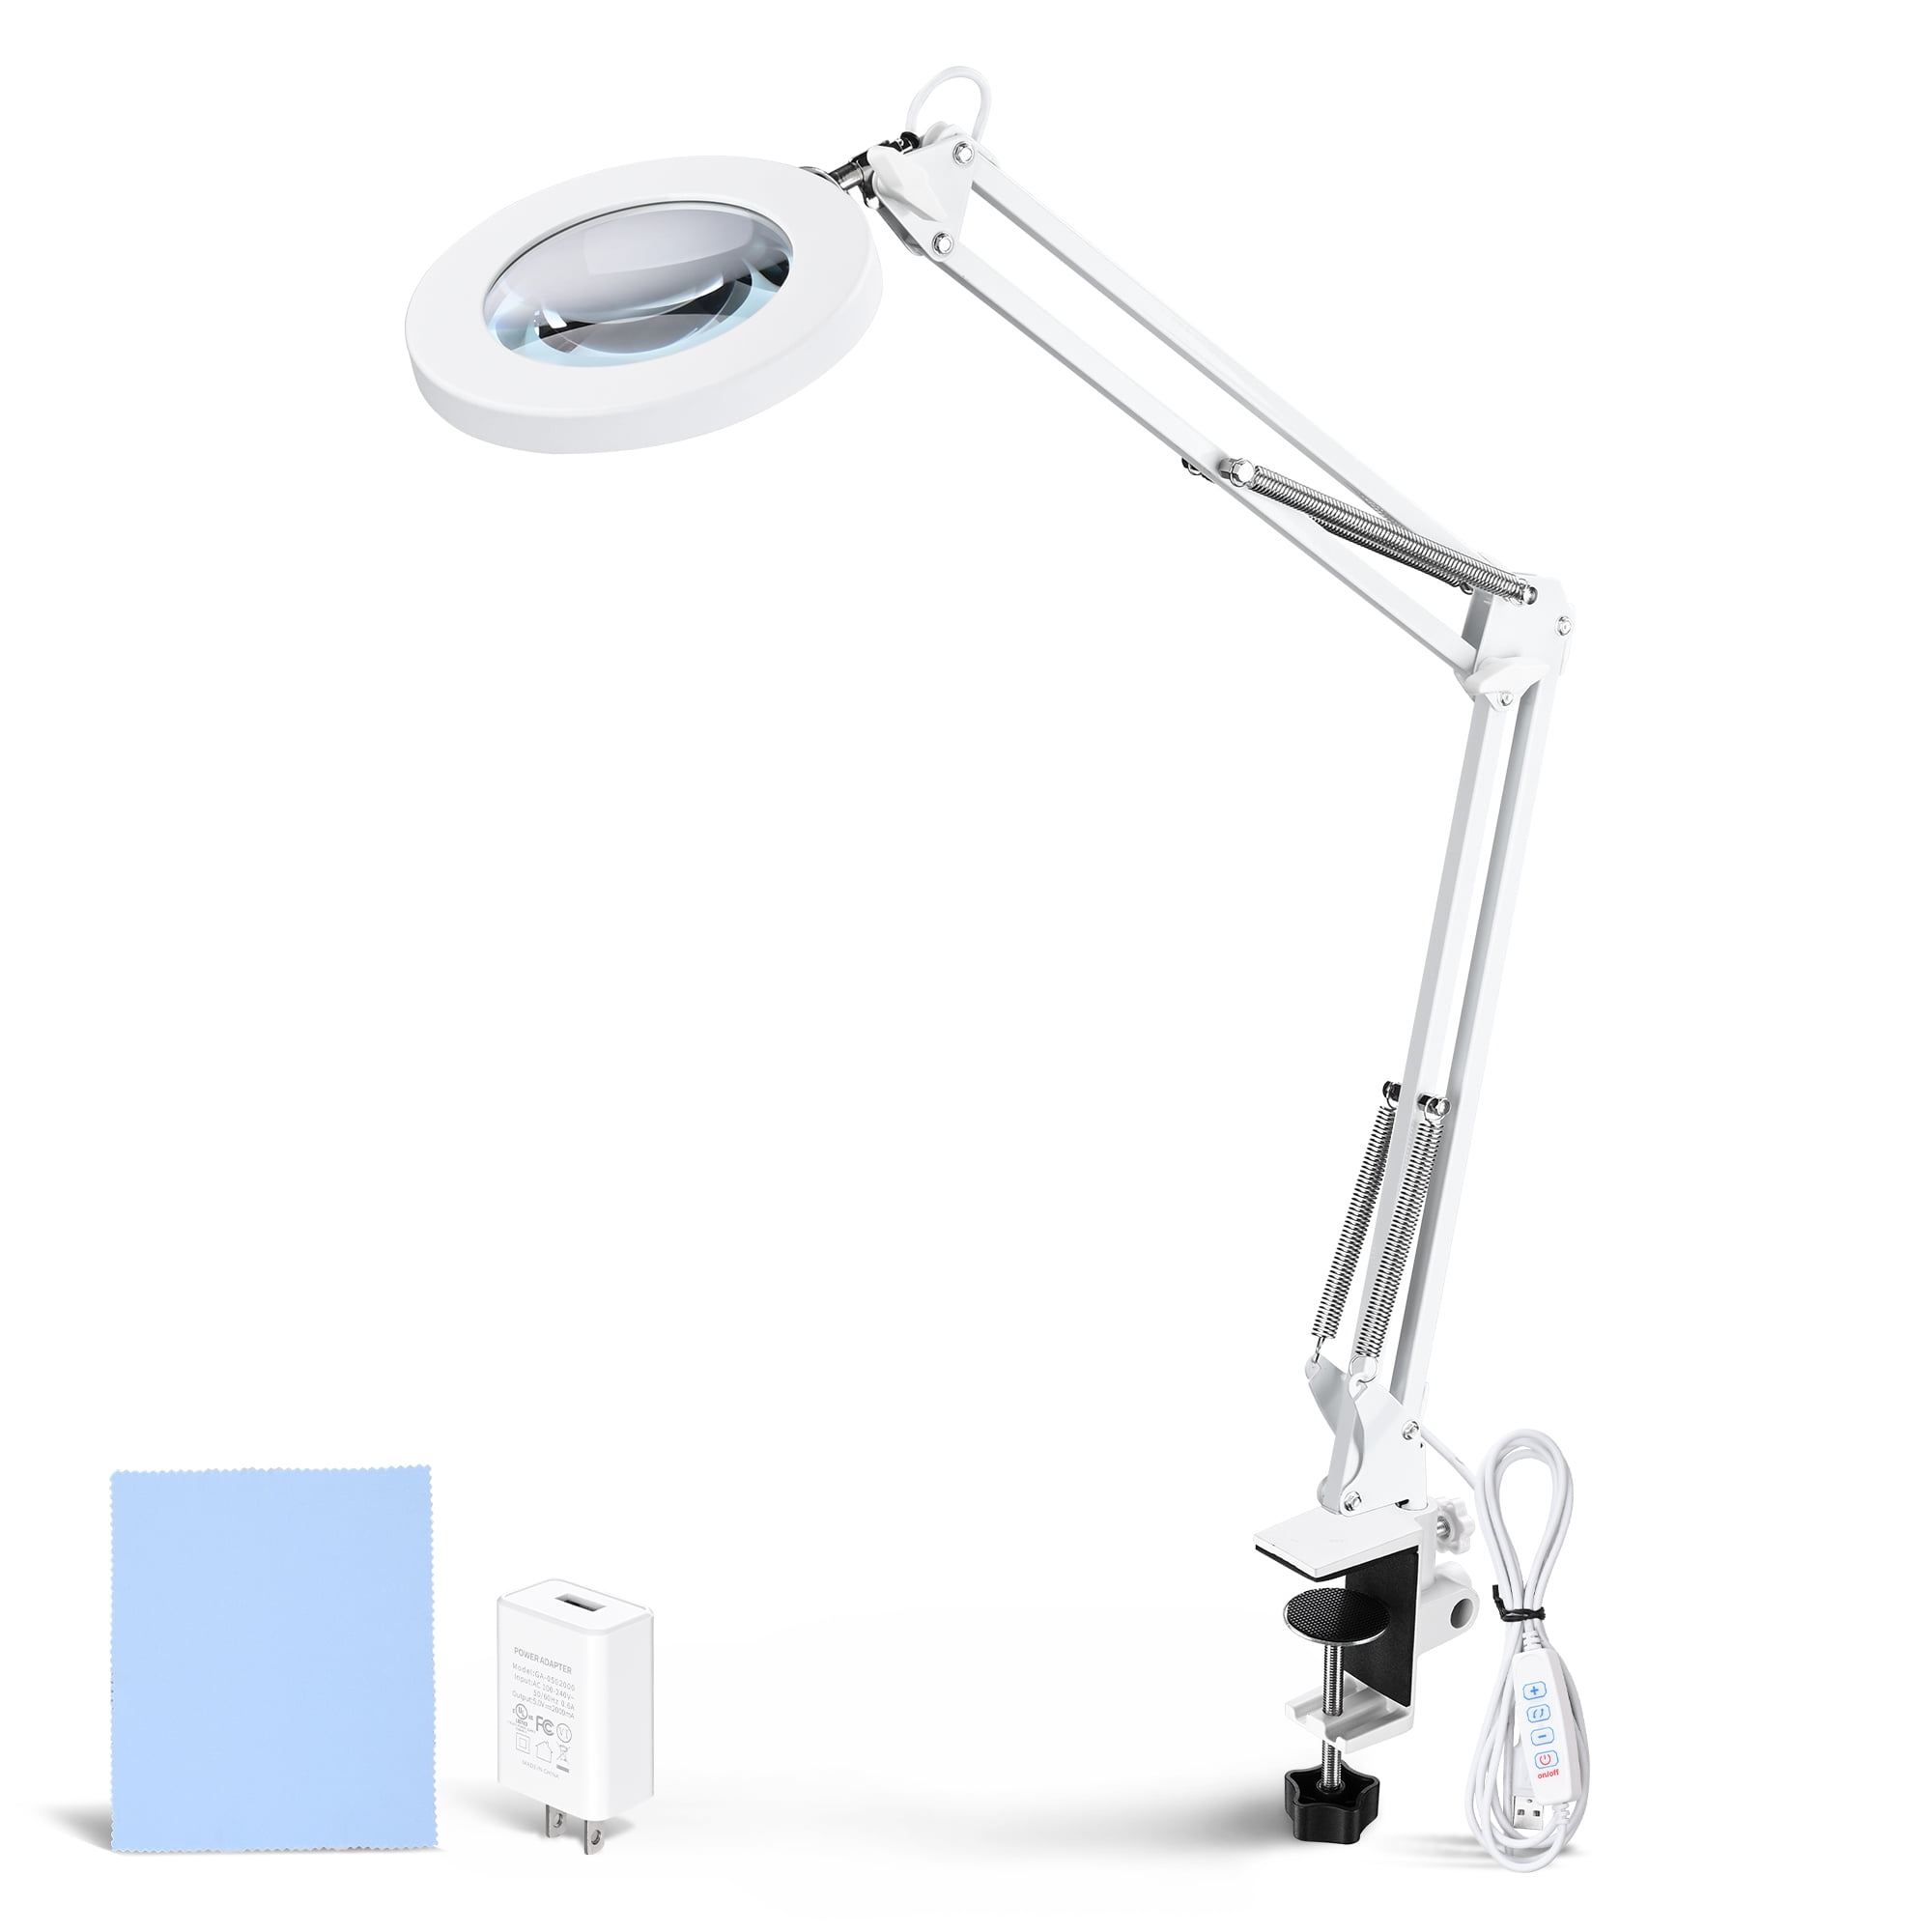 KUVRS 10X Magnifying Glass Lamp with Bright LED Light, Adjustable